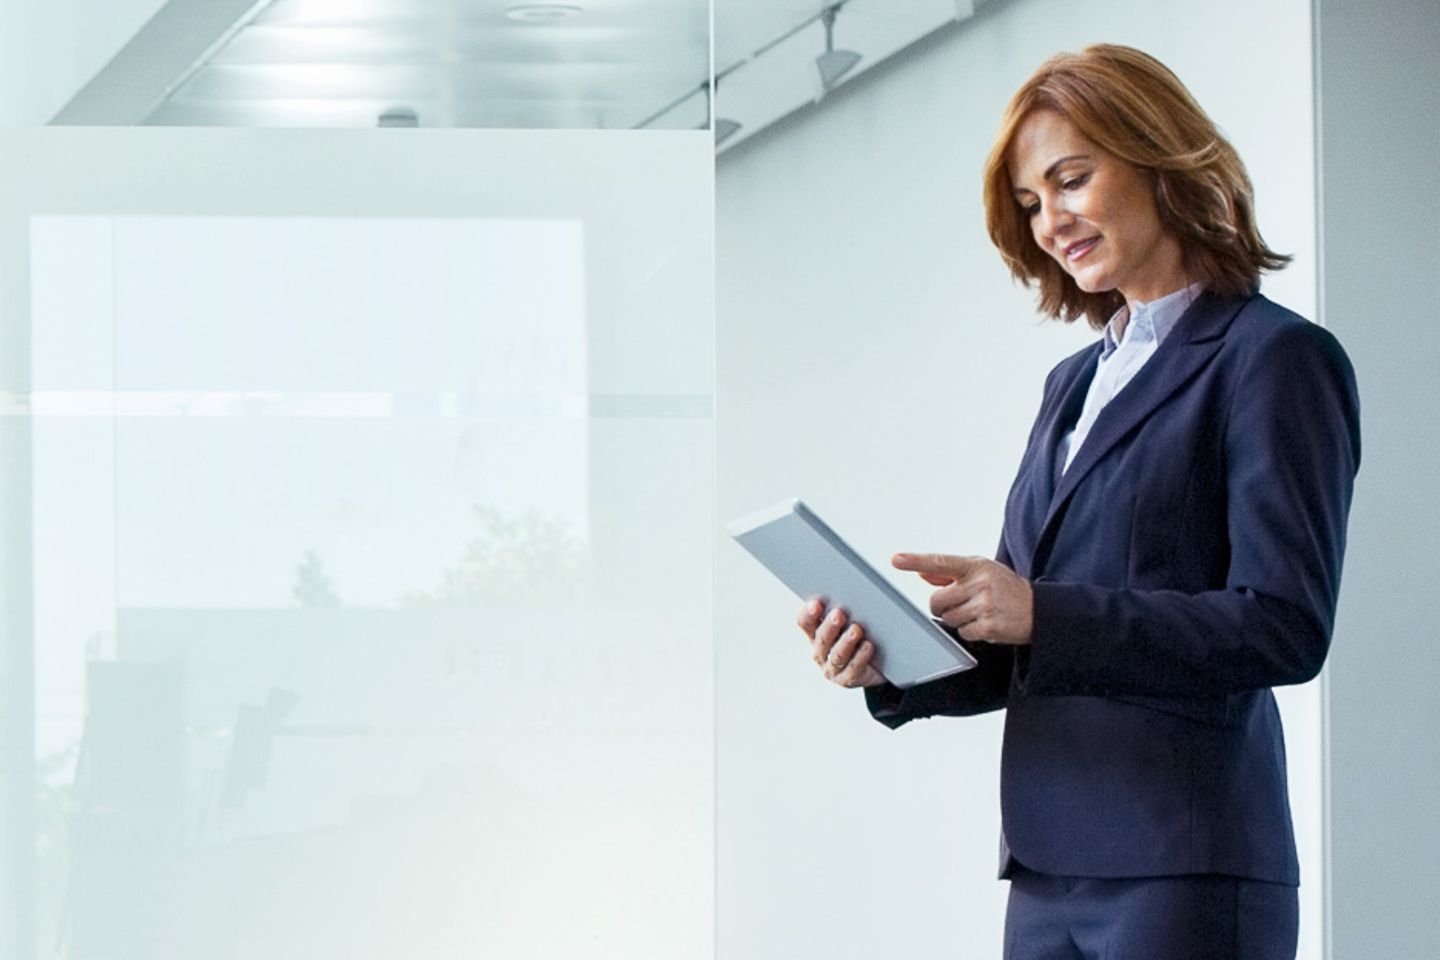 Business woman stands in front of the window front of a modern office building and works on a tablet.